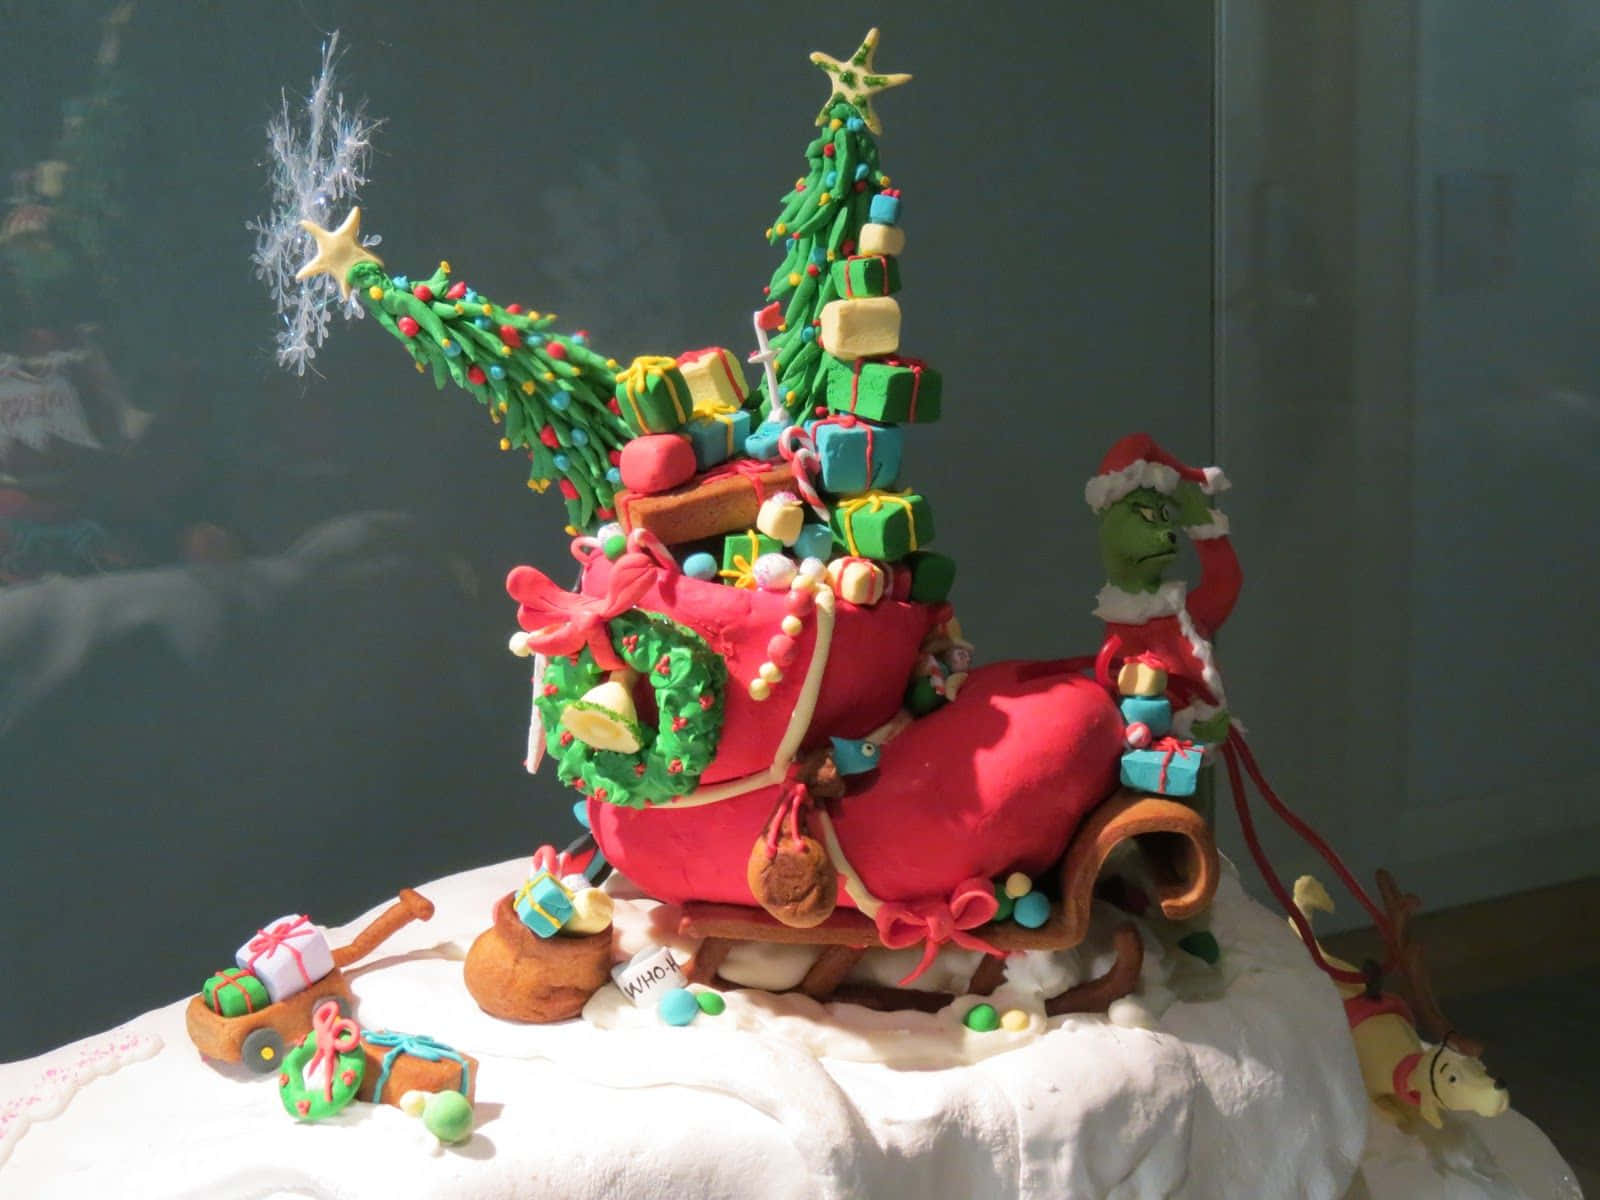 A Cake Decorated With Christmas Trees And Decorations Wallpaper